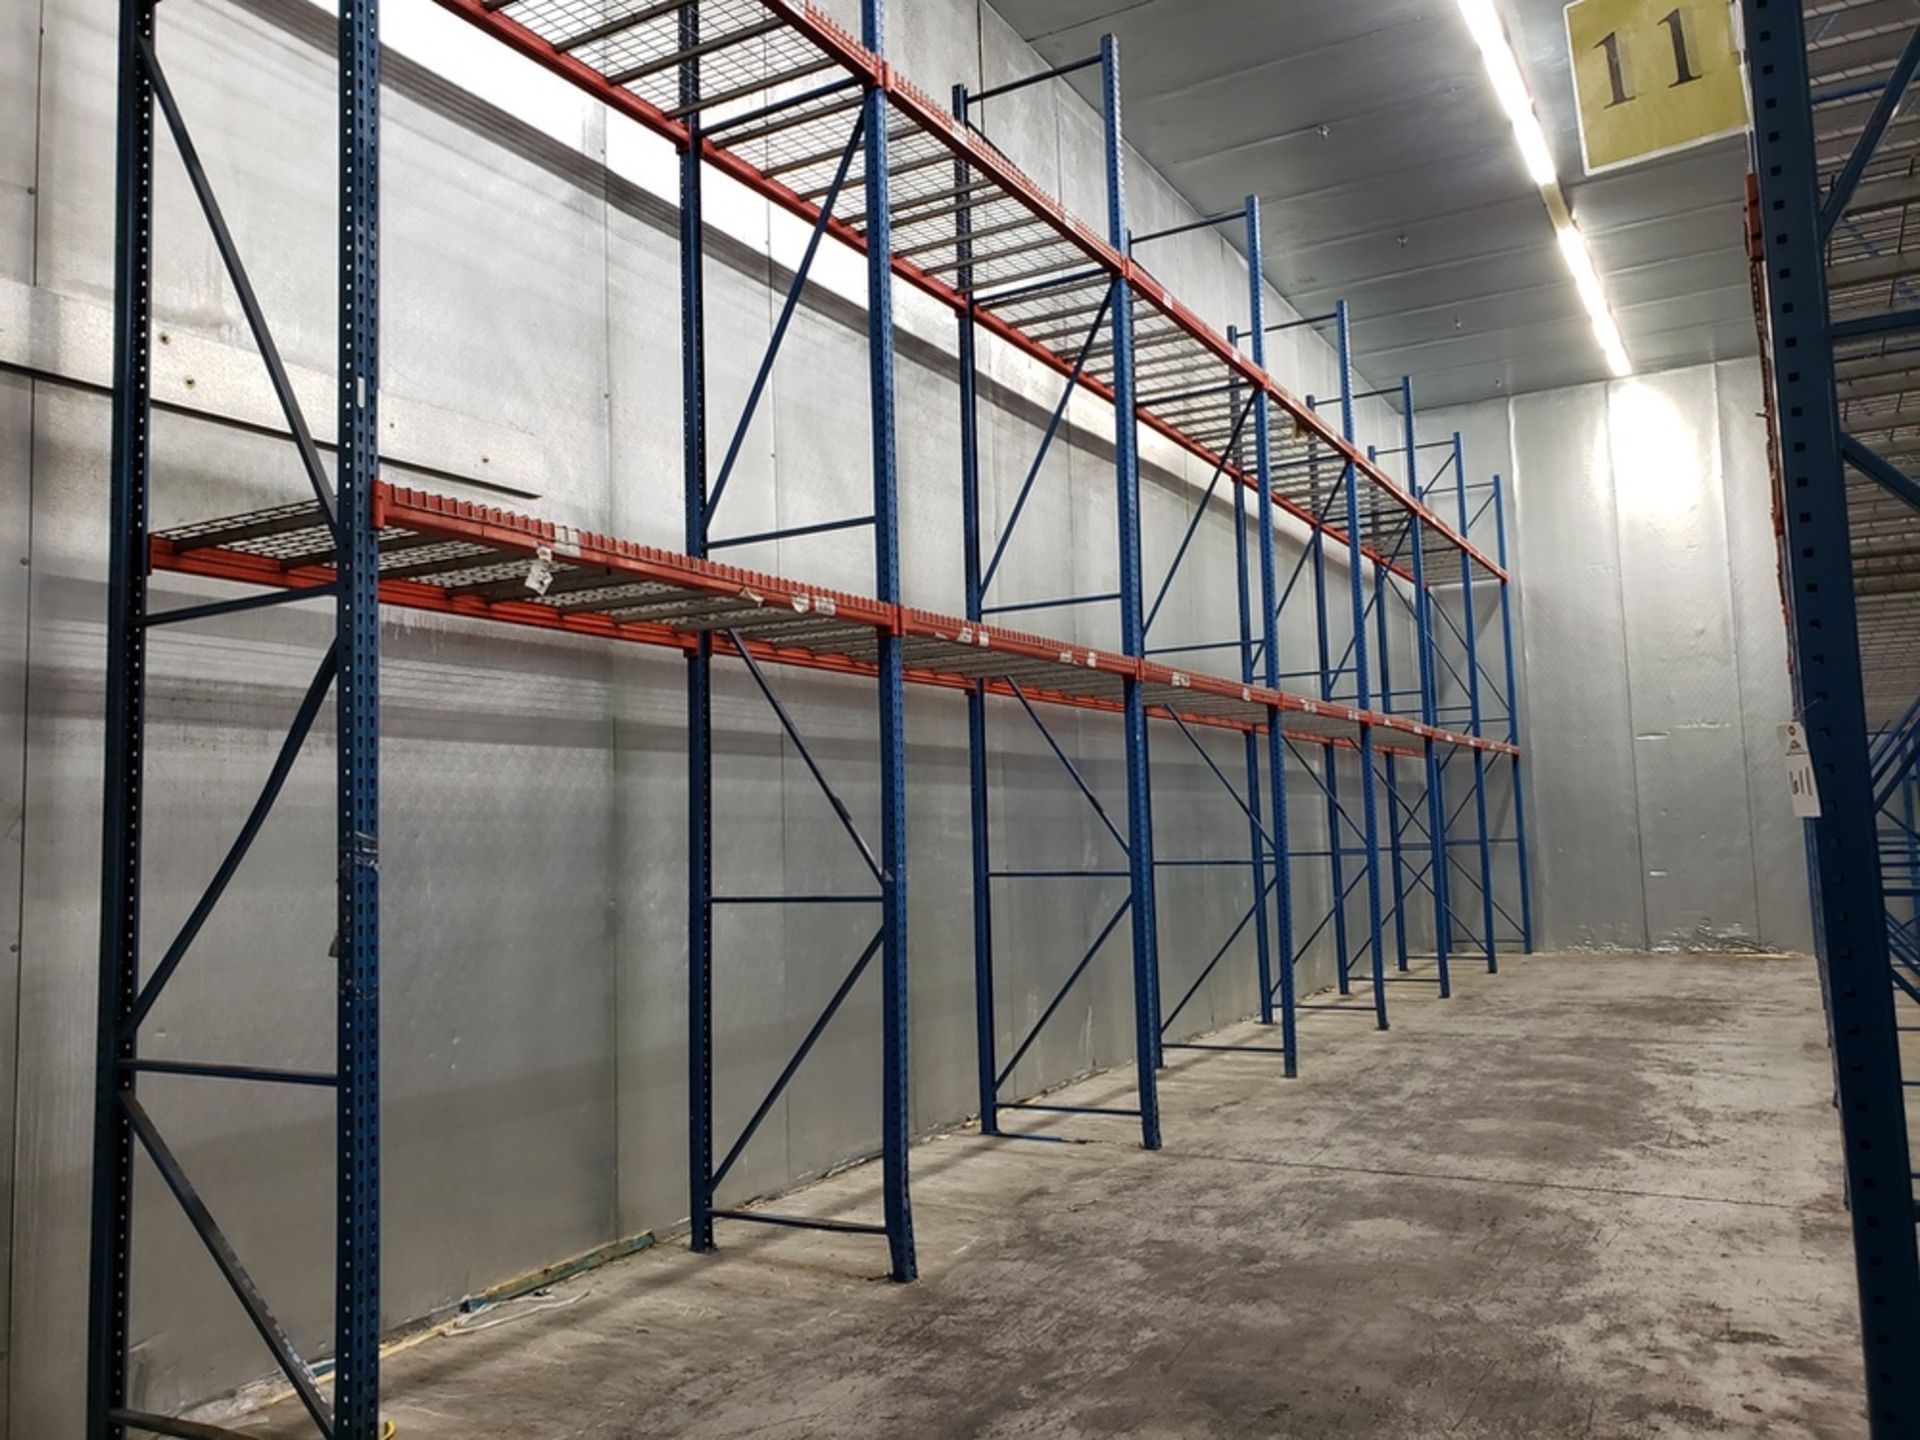 Lot of Pallet Racking, (49) 42" X 16' Uprights, (172) 8' Beams, (172) Wire Shelves | Rig Fee: $1500 - Image 3 of 3